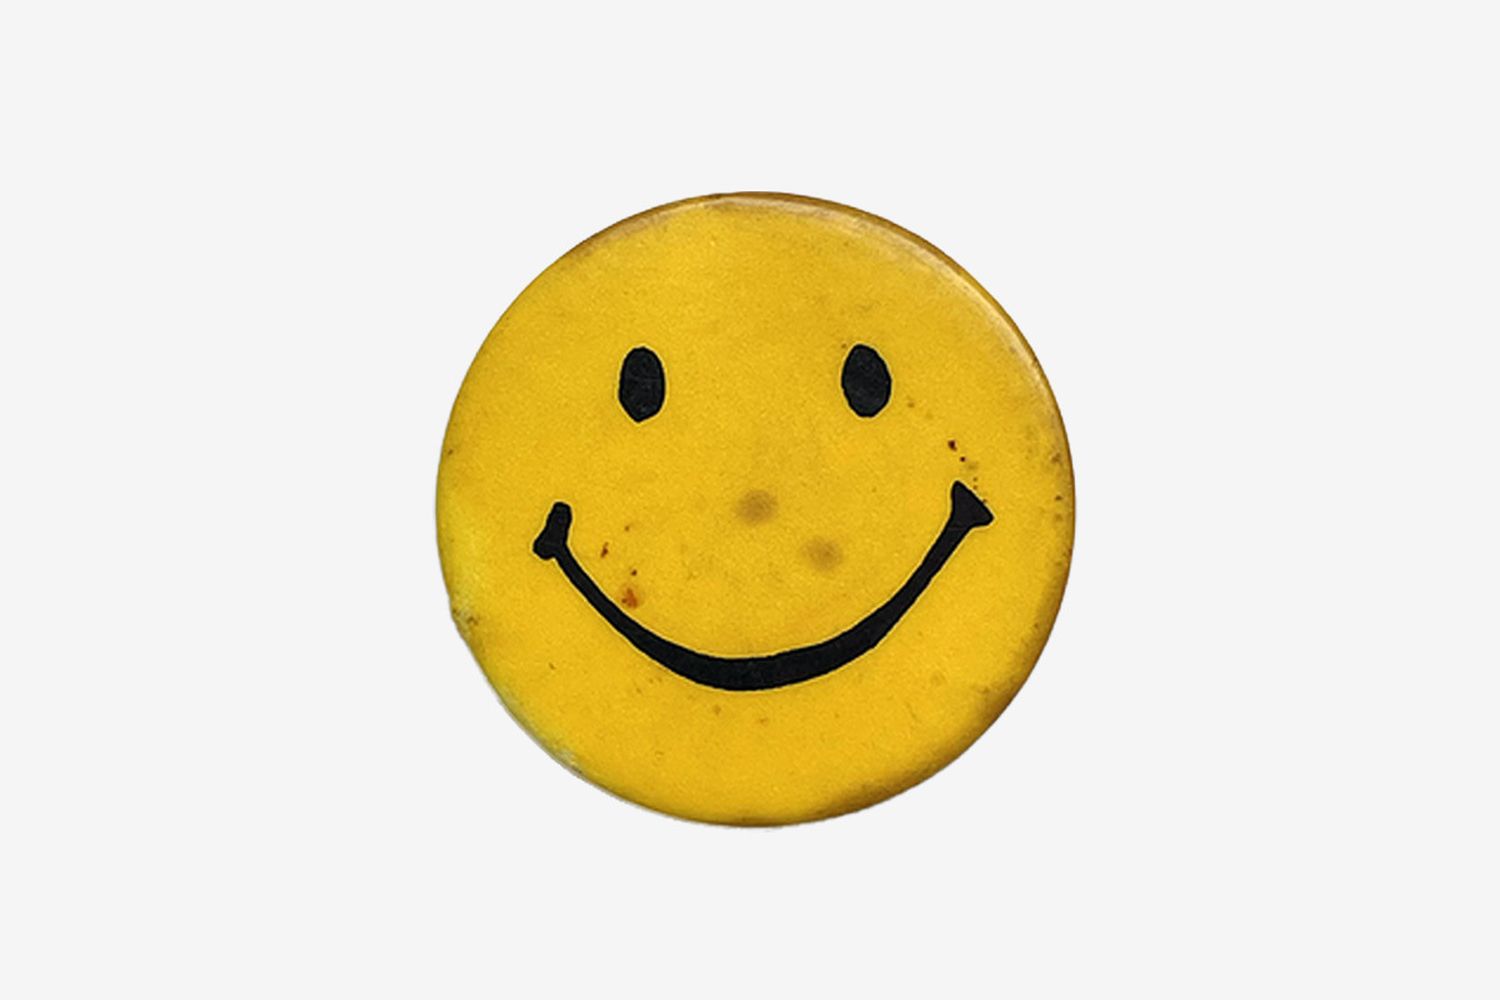 1970s Smiley Face Pin Badge